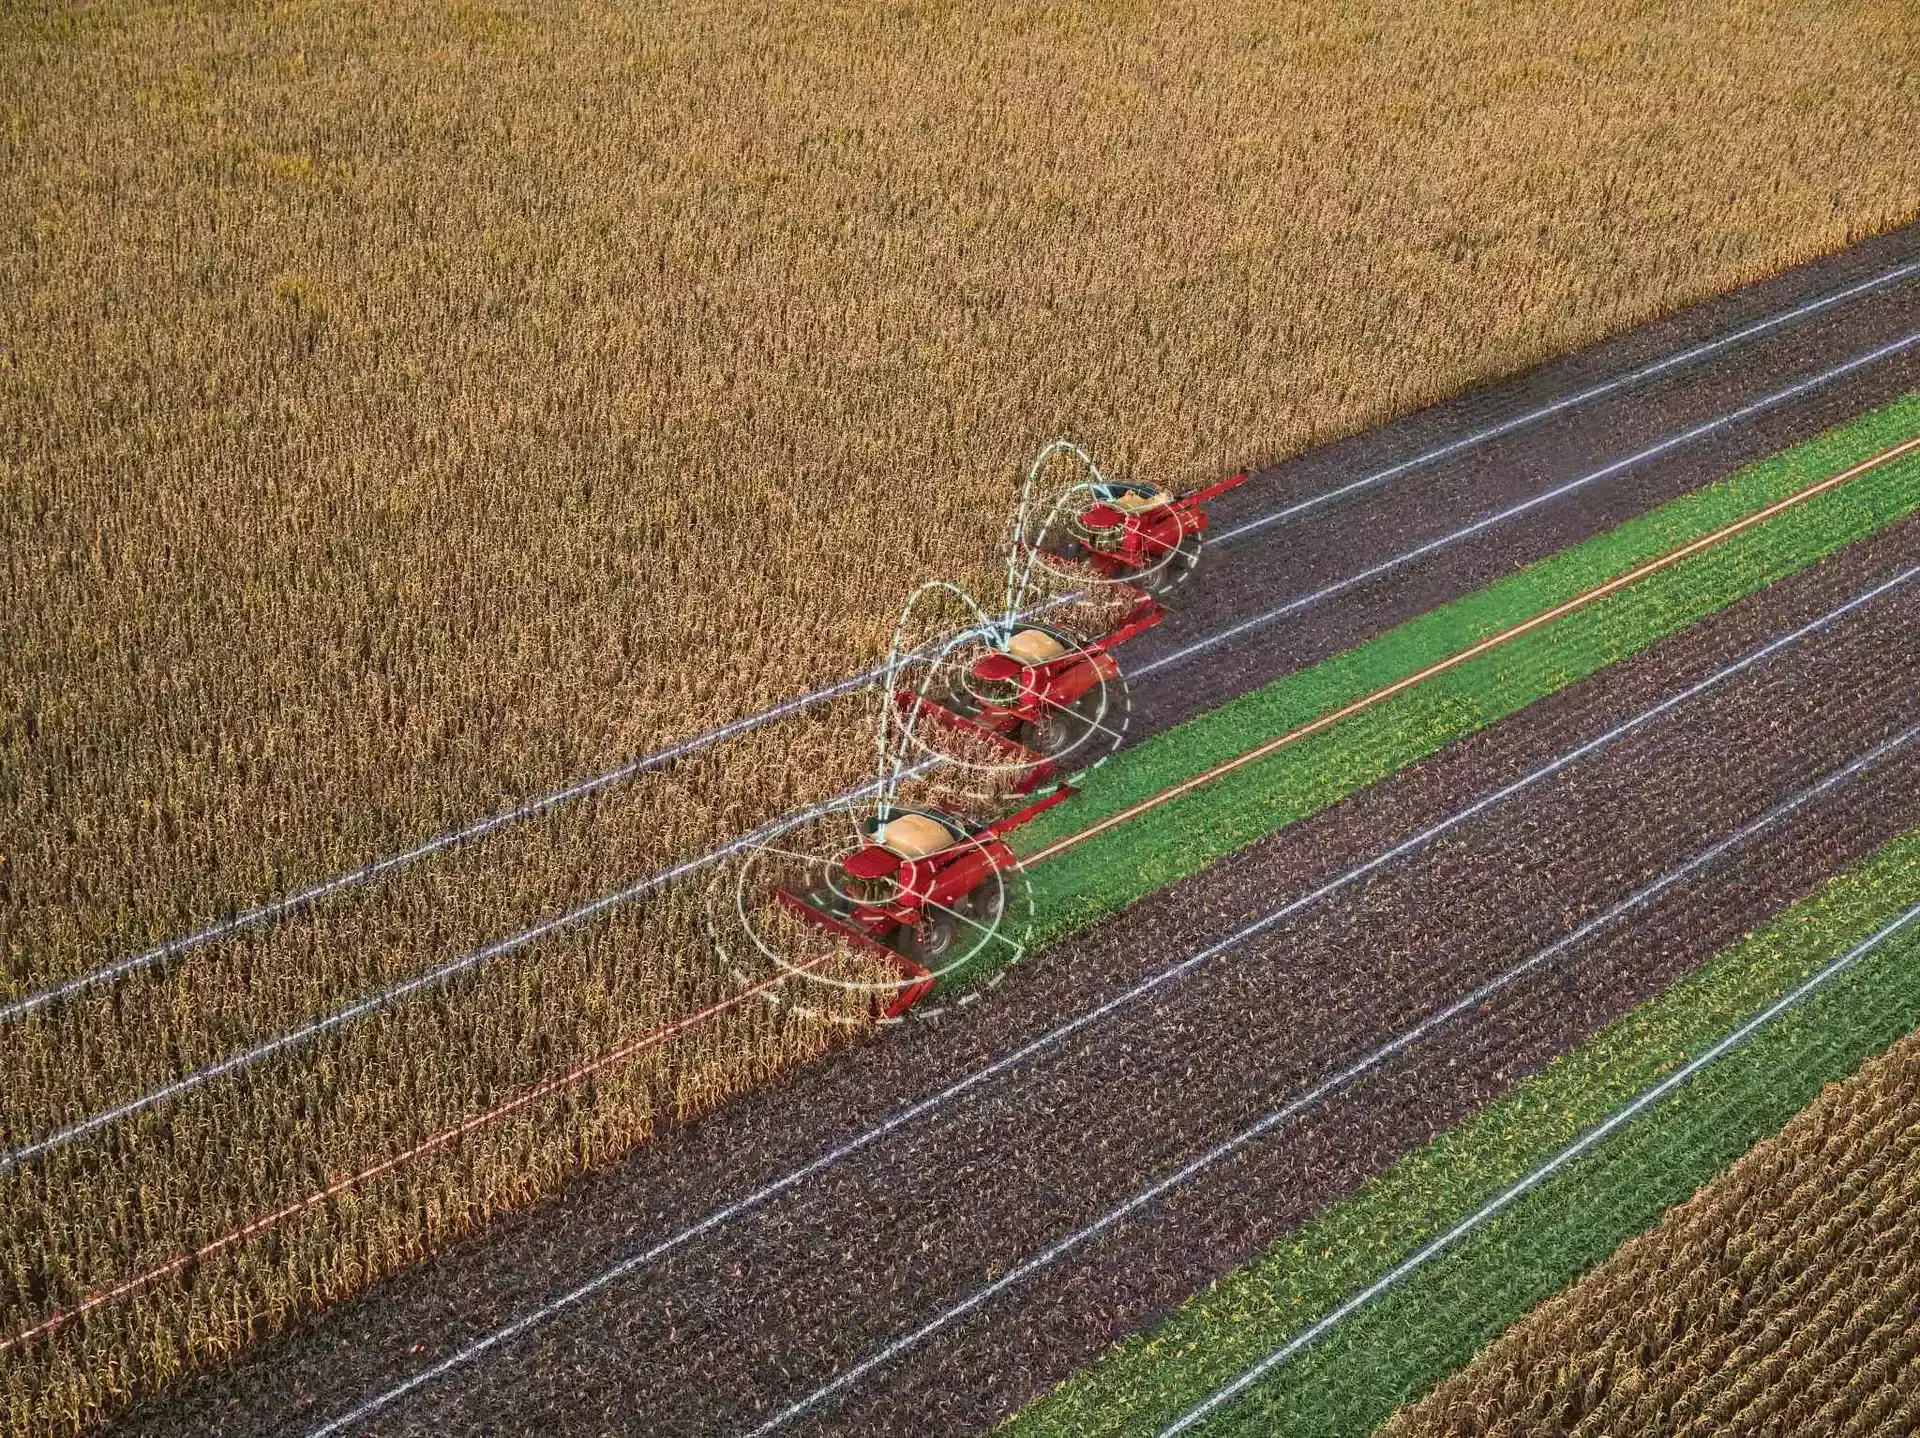 Three Axial-flow combines in field 